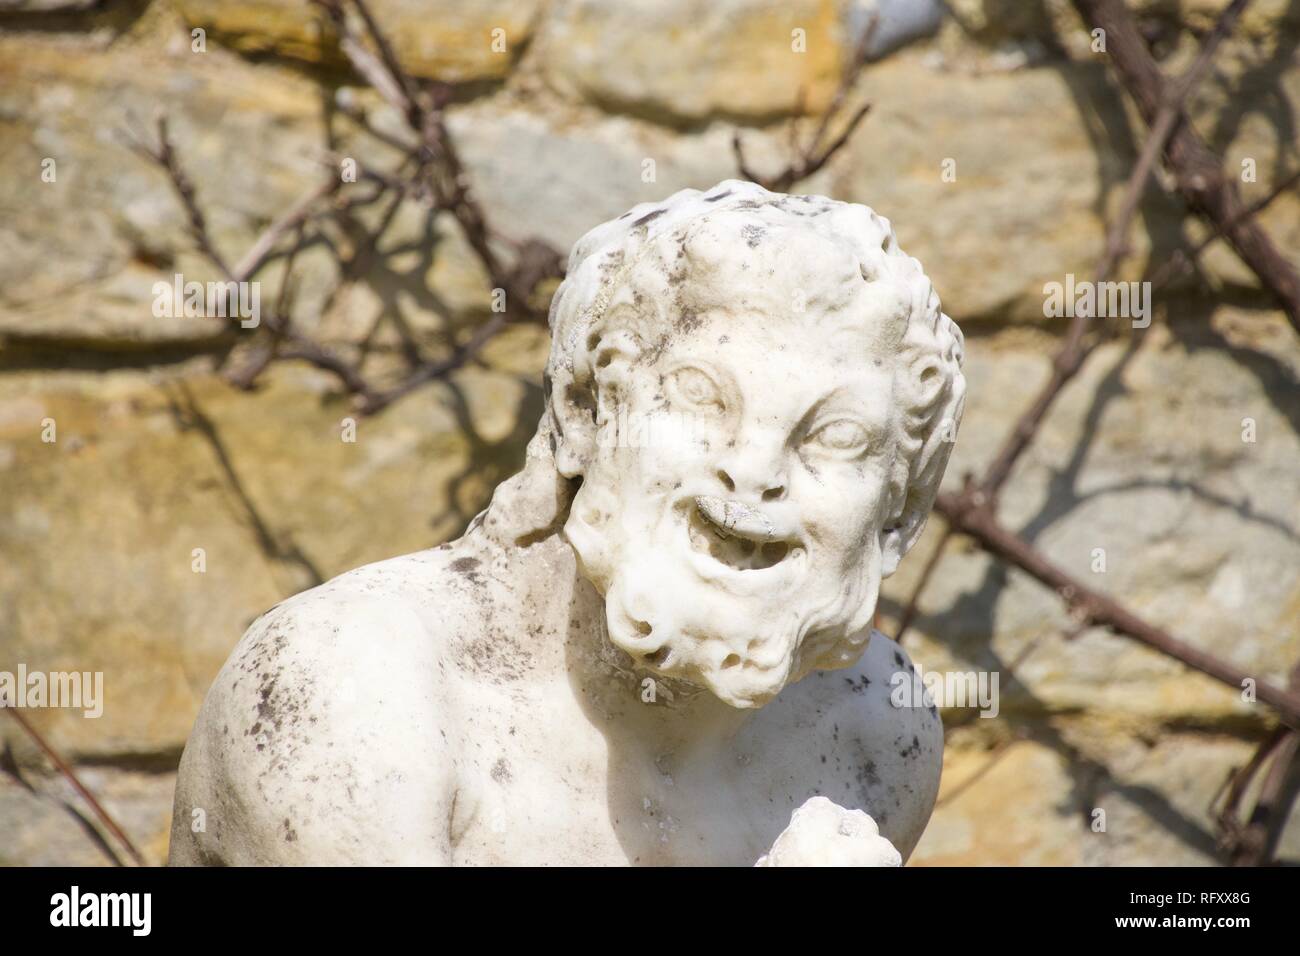 A stone statute, outdoors and in bright sunlight, of a funny old man with a shrivelled face and a big laughing grin that makes him look like a satyr Stock Photo